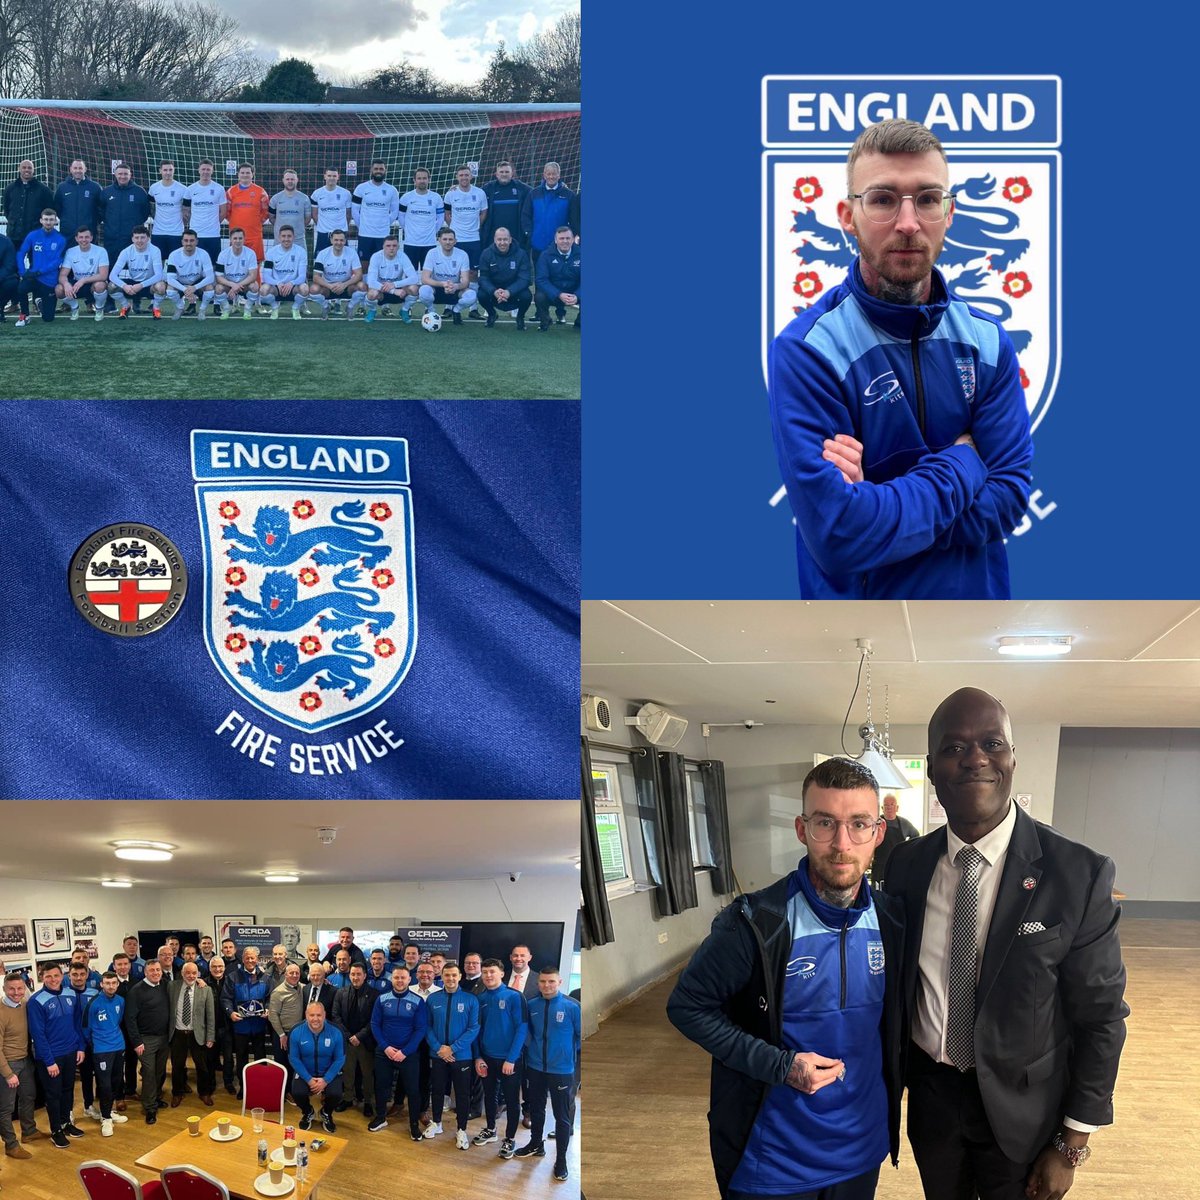 Another year committed to the England Fire Service Football Section ⚽️⚽️⚽️🦁🦁🦁 #physio #physiotherapist #sportstherapy #sportstherapist #physiotherapy #footballphysio #sportsphysio #england #huddersfield #westyorkshire #yorkshire @EnglishFireSFS